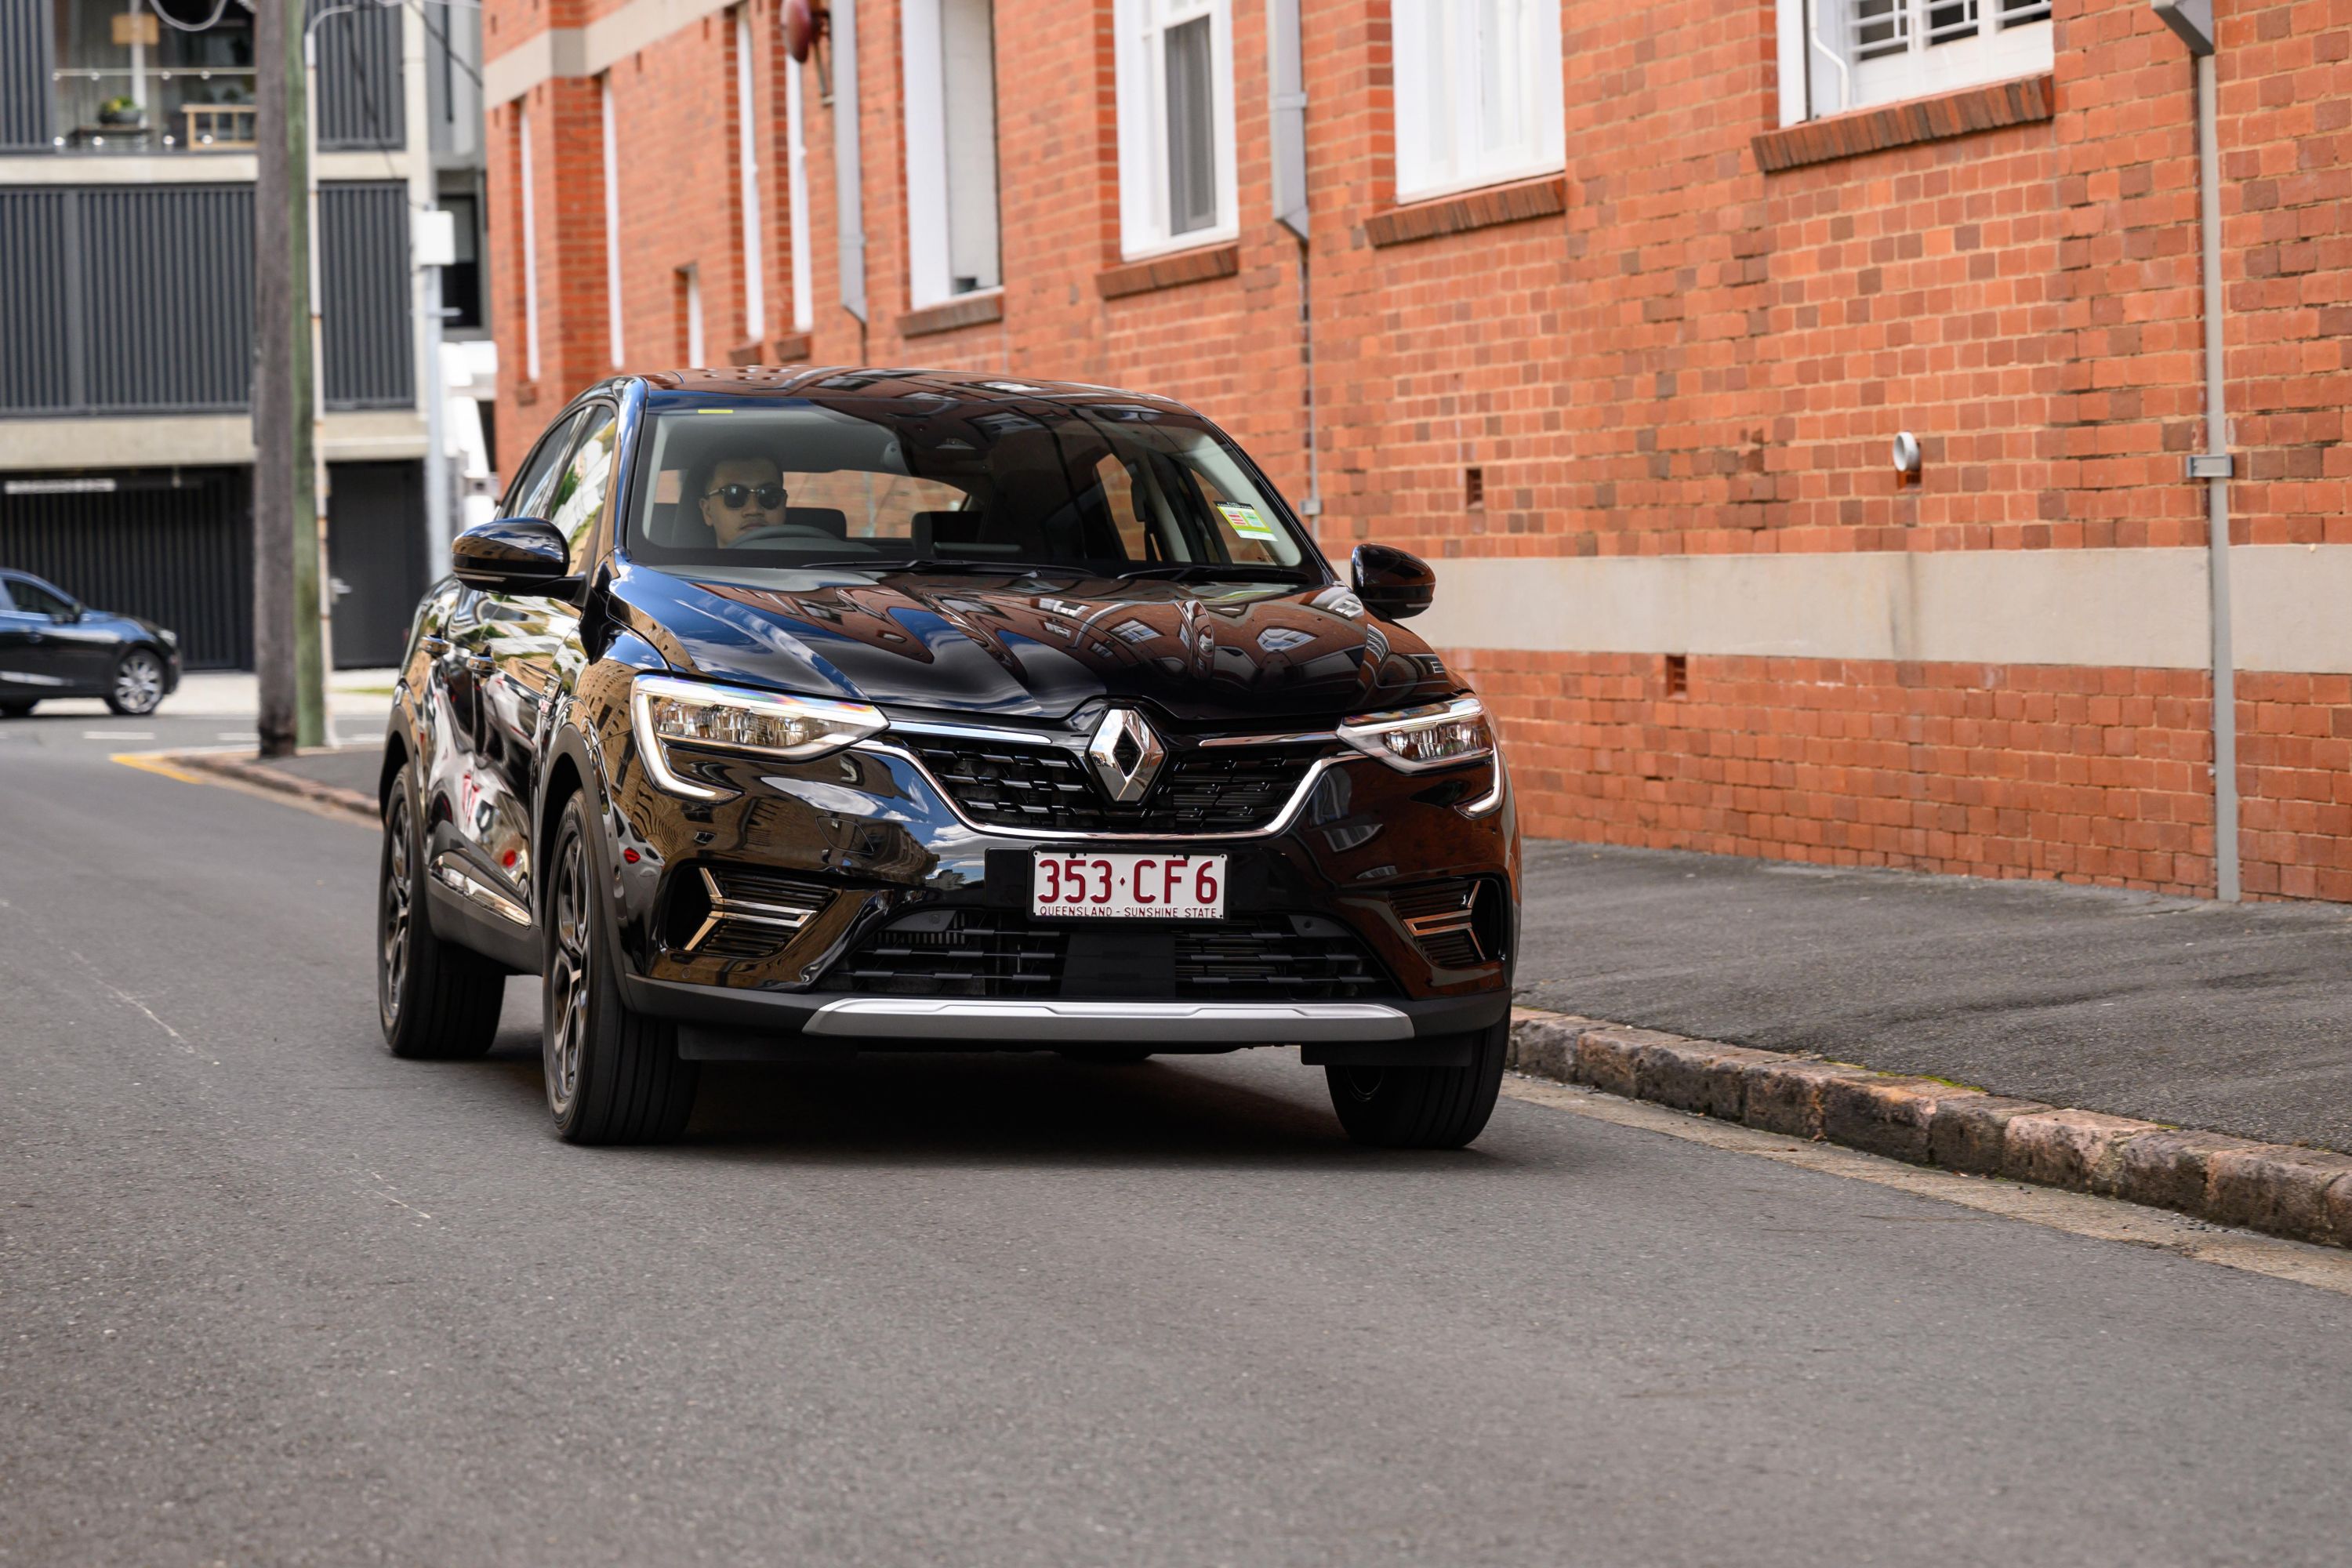 Renault Arkana 2022 review, CX-30 and T-Cross rival tested